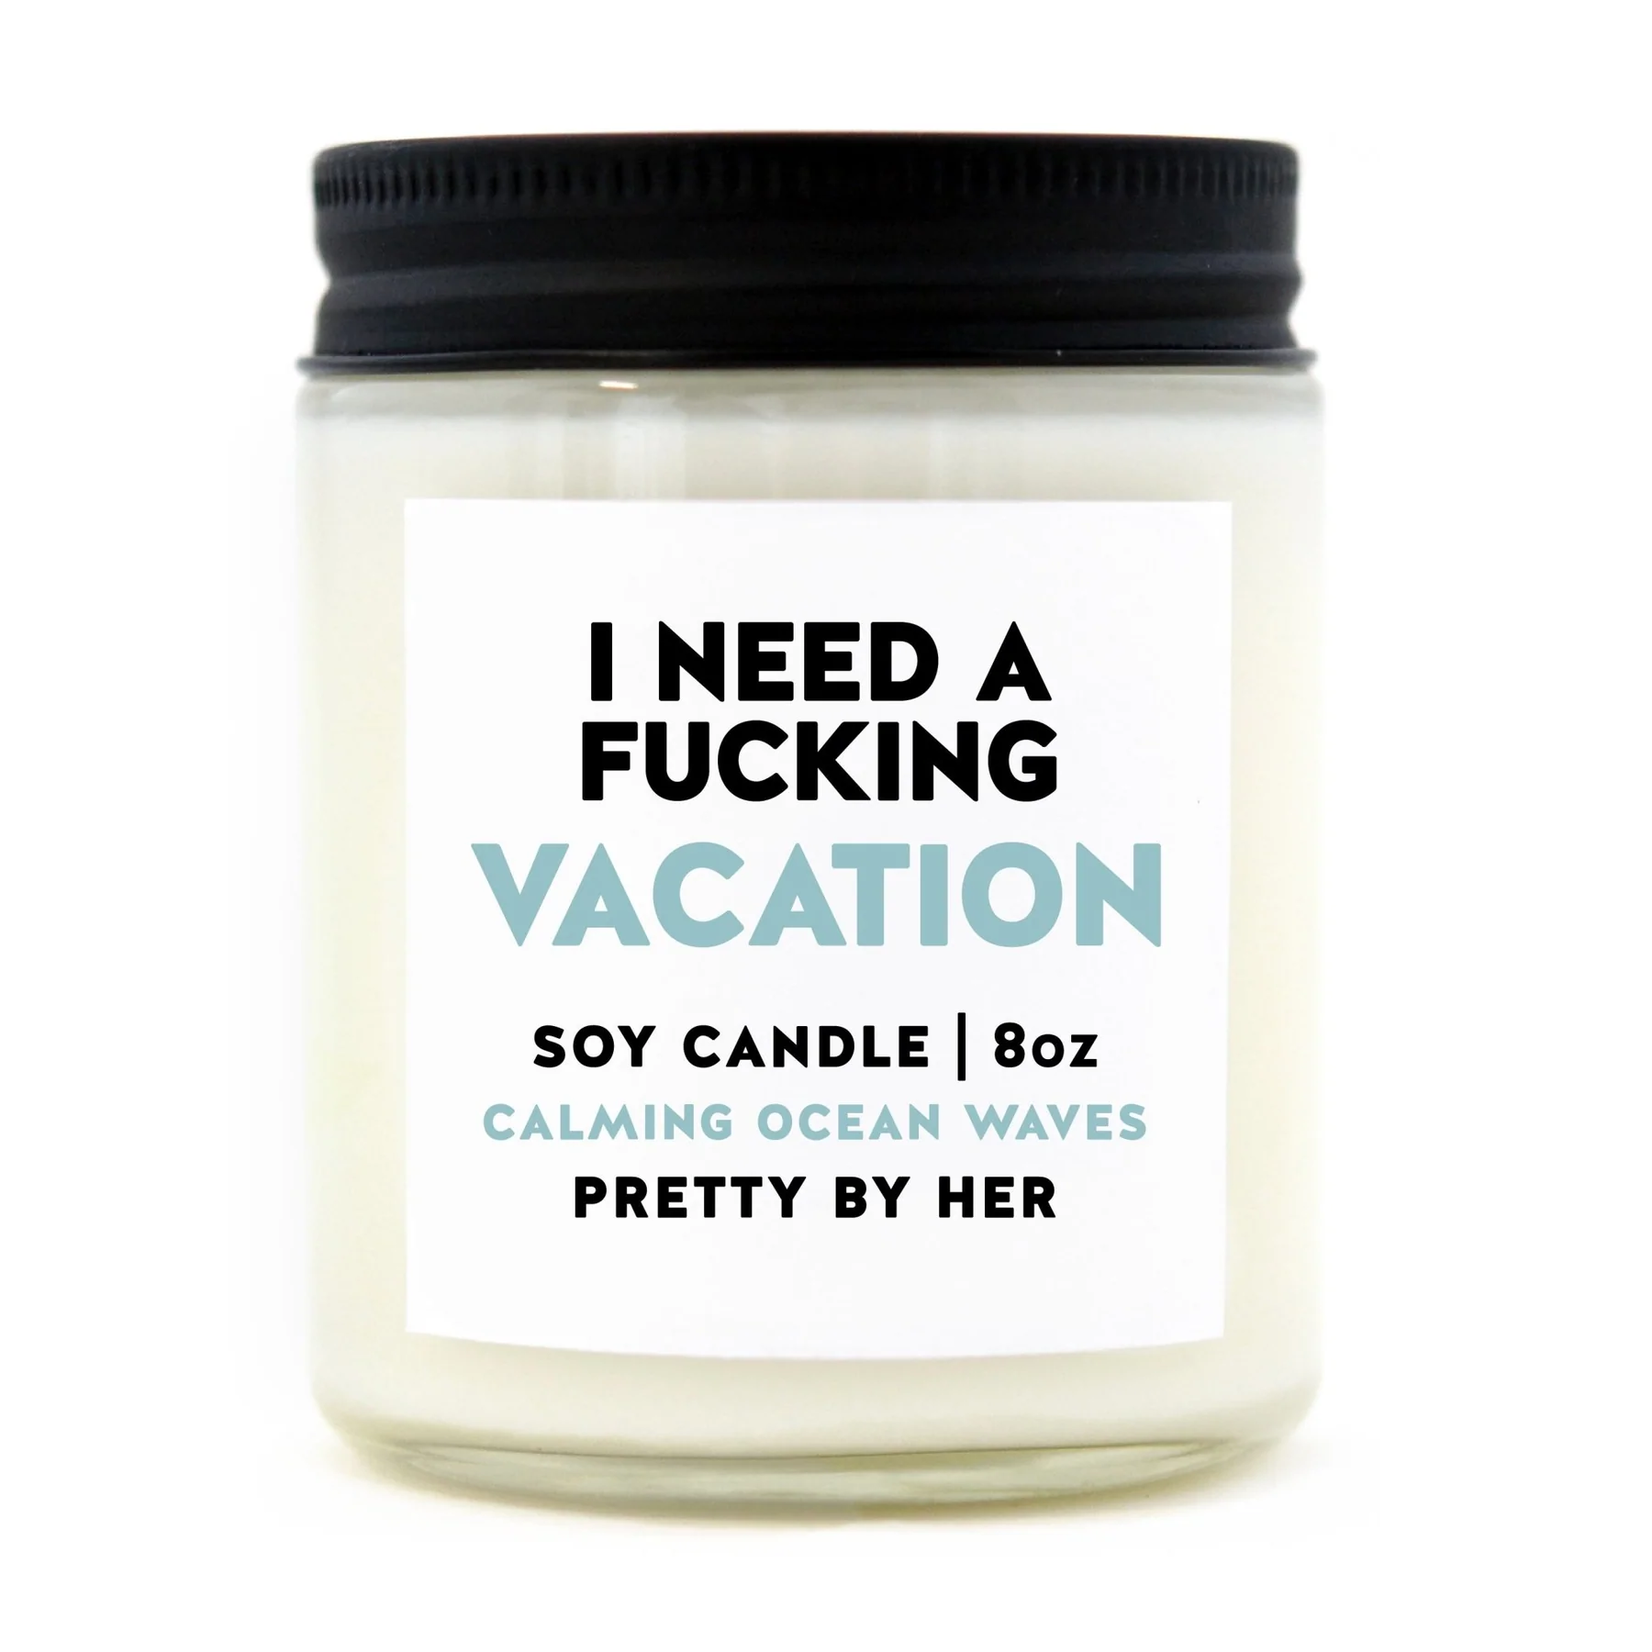 Soy Candle - I Need a Vacation